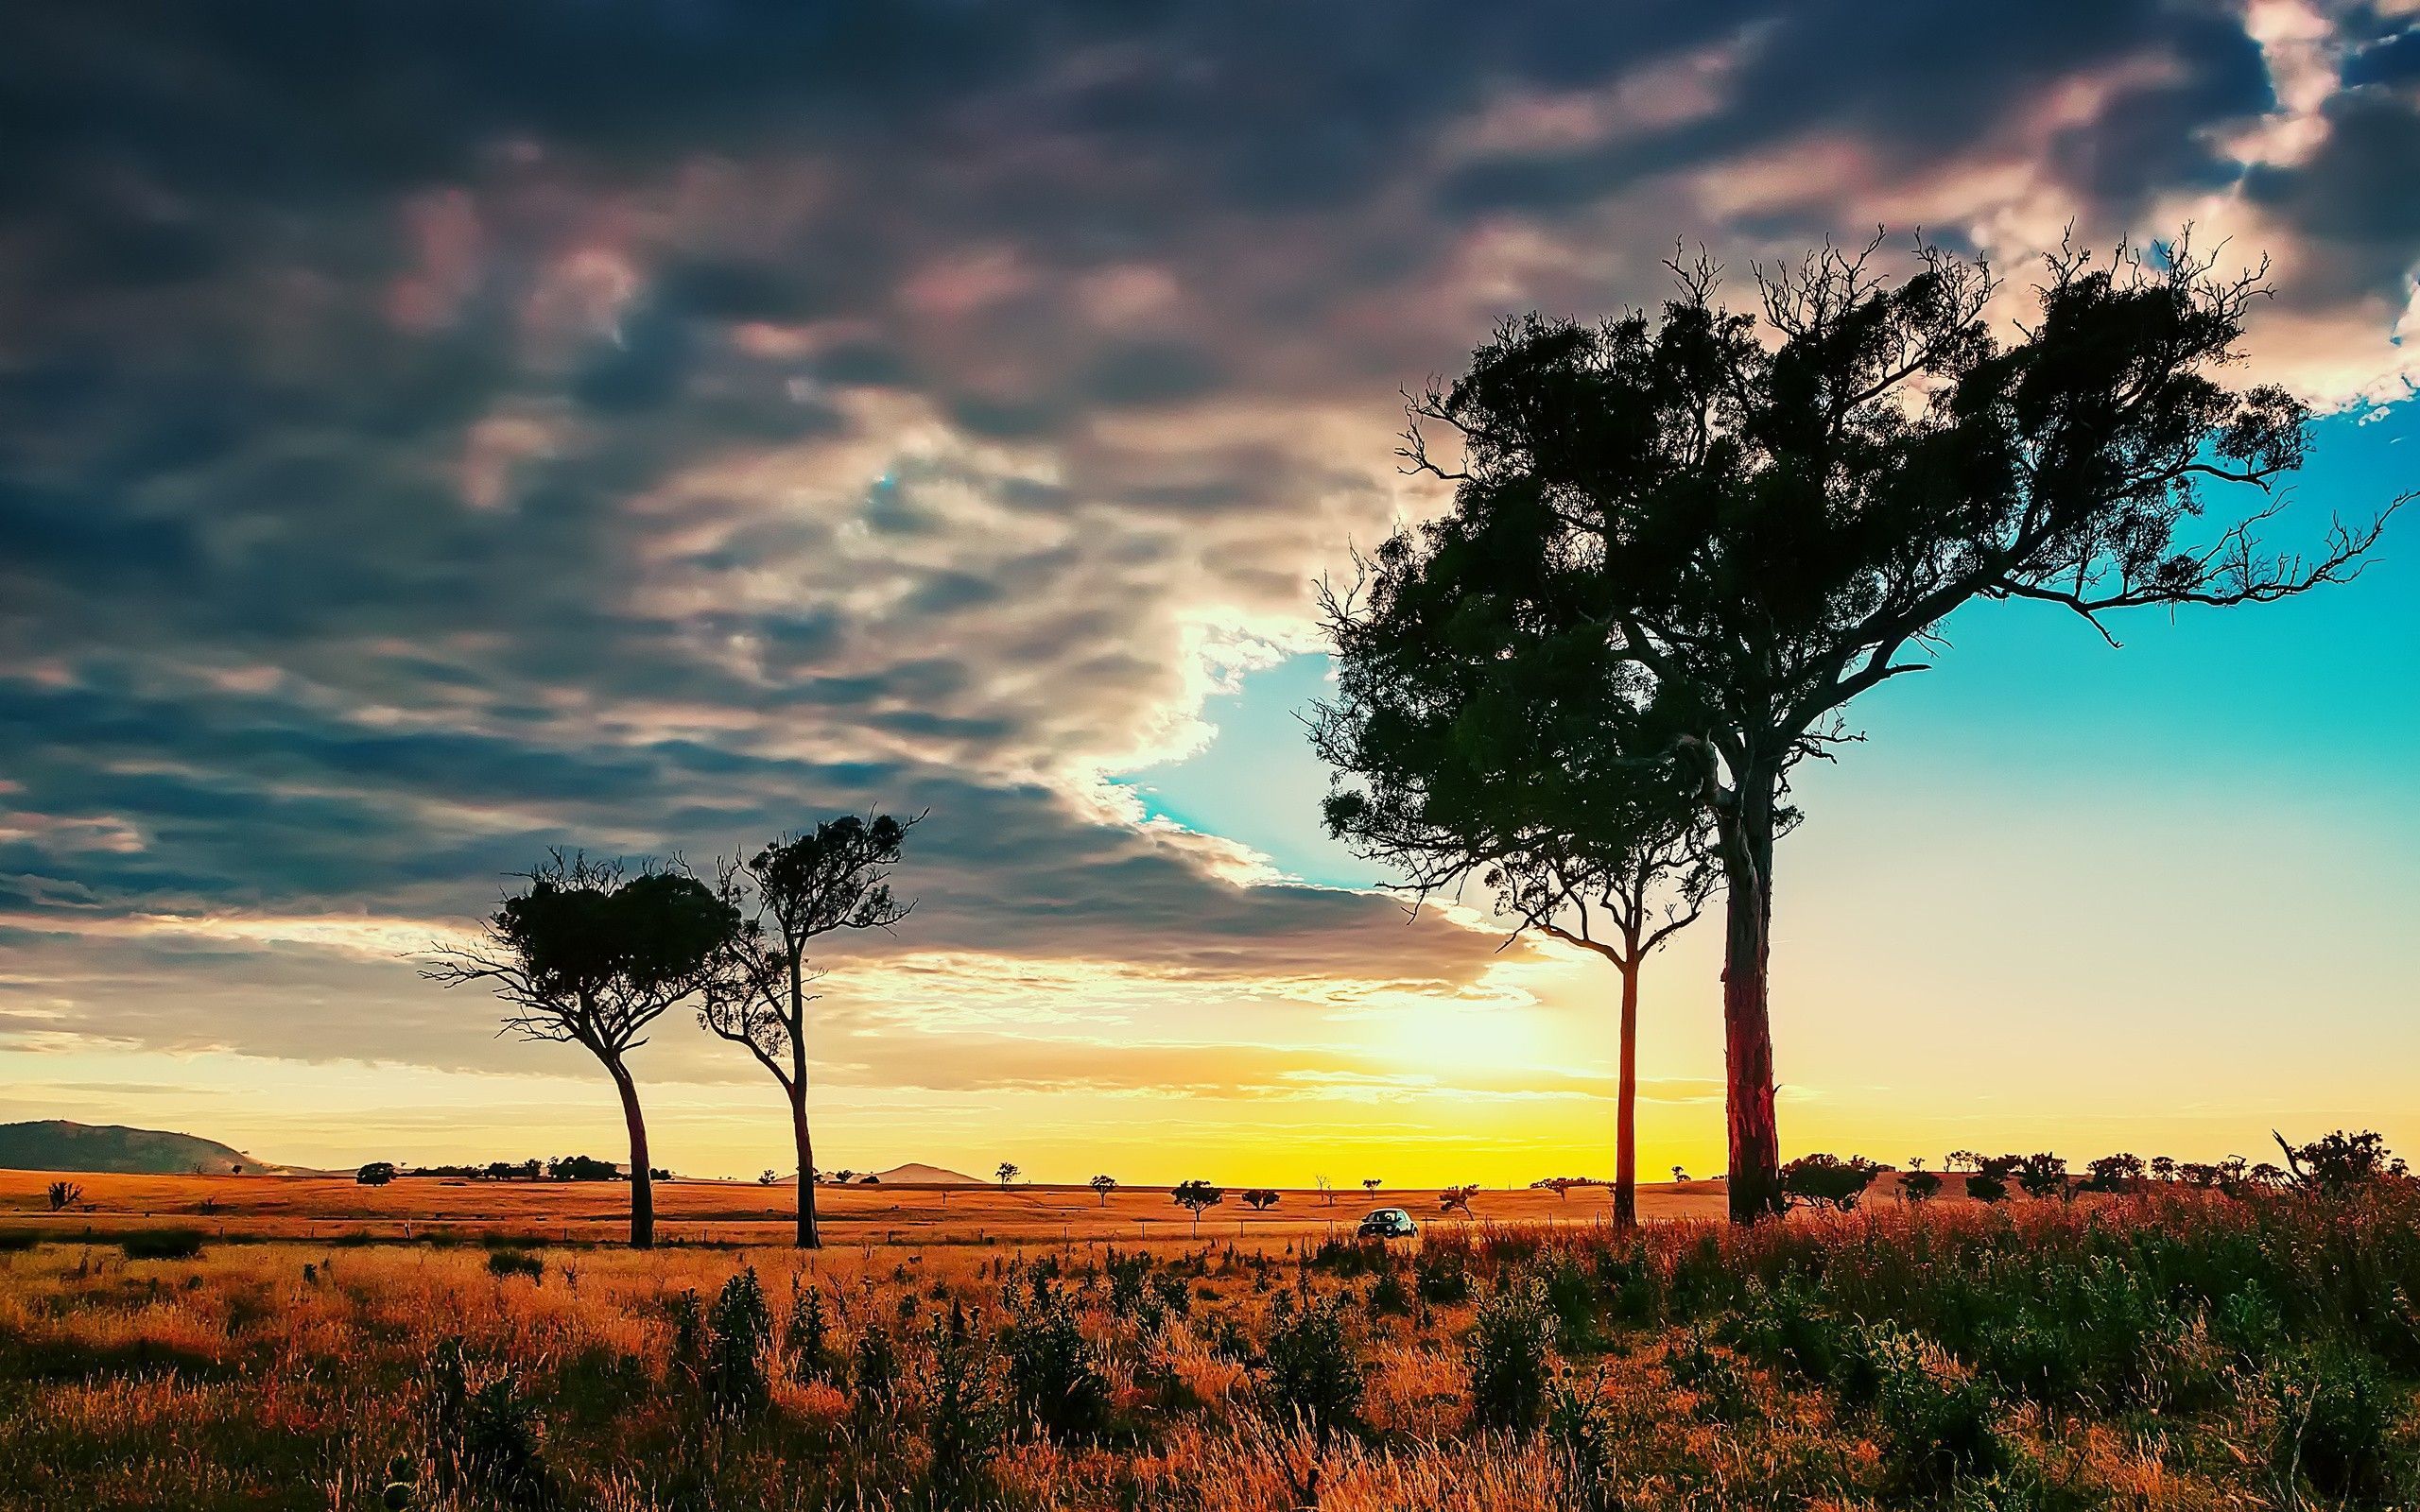 Trees in the African savanna wallpapers and images - wallpapers ...